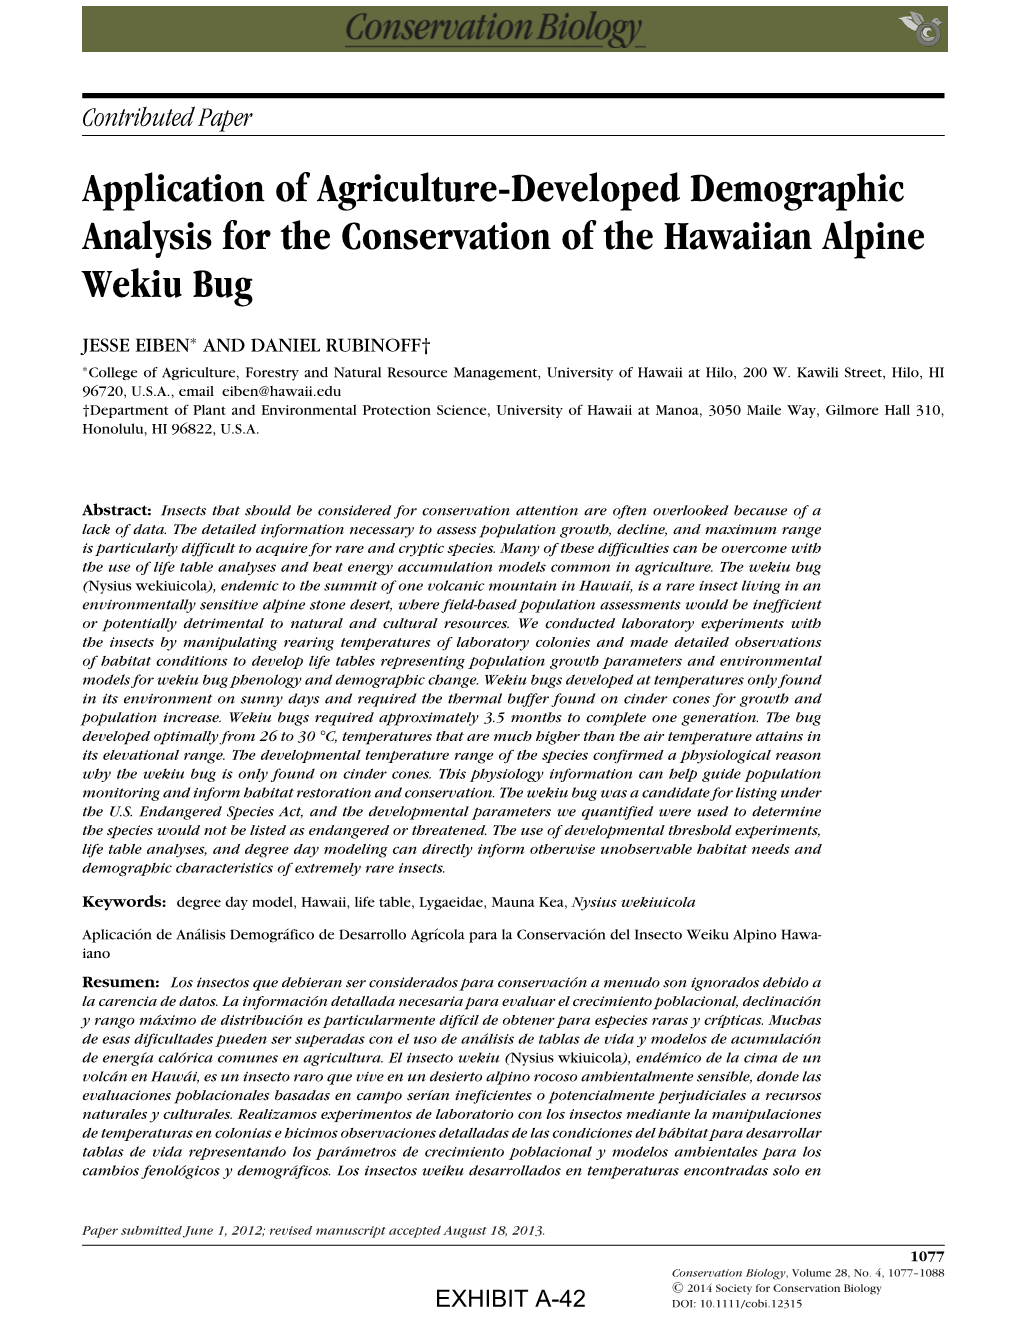 Application of Agriculturedeveloped Demographic Analysis for The